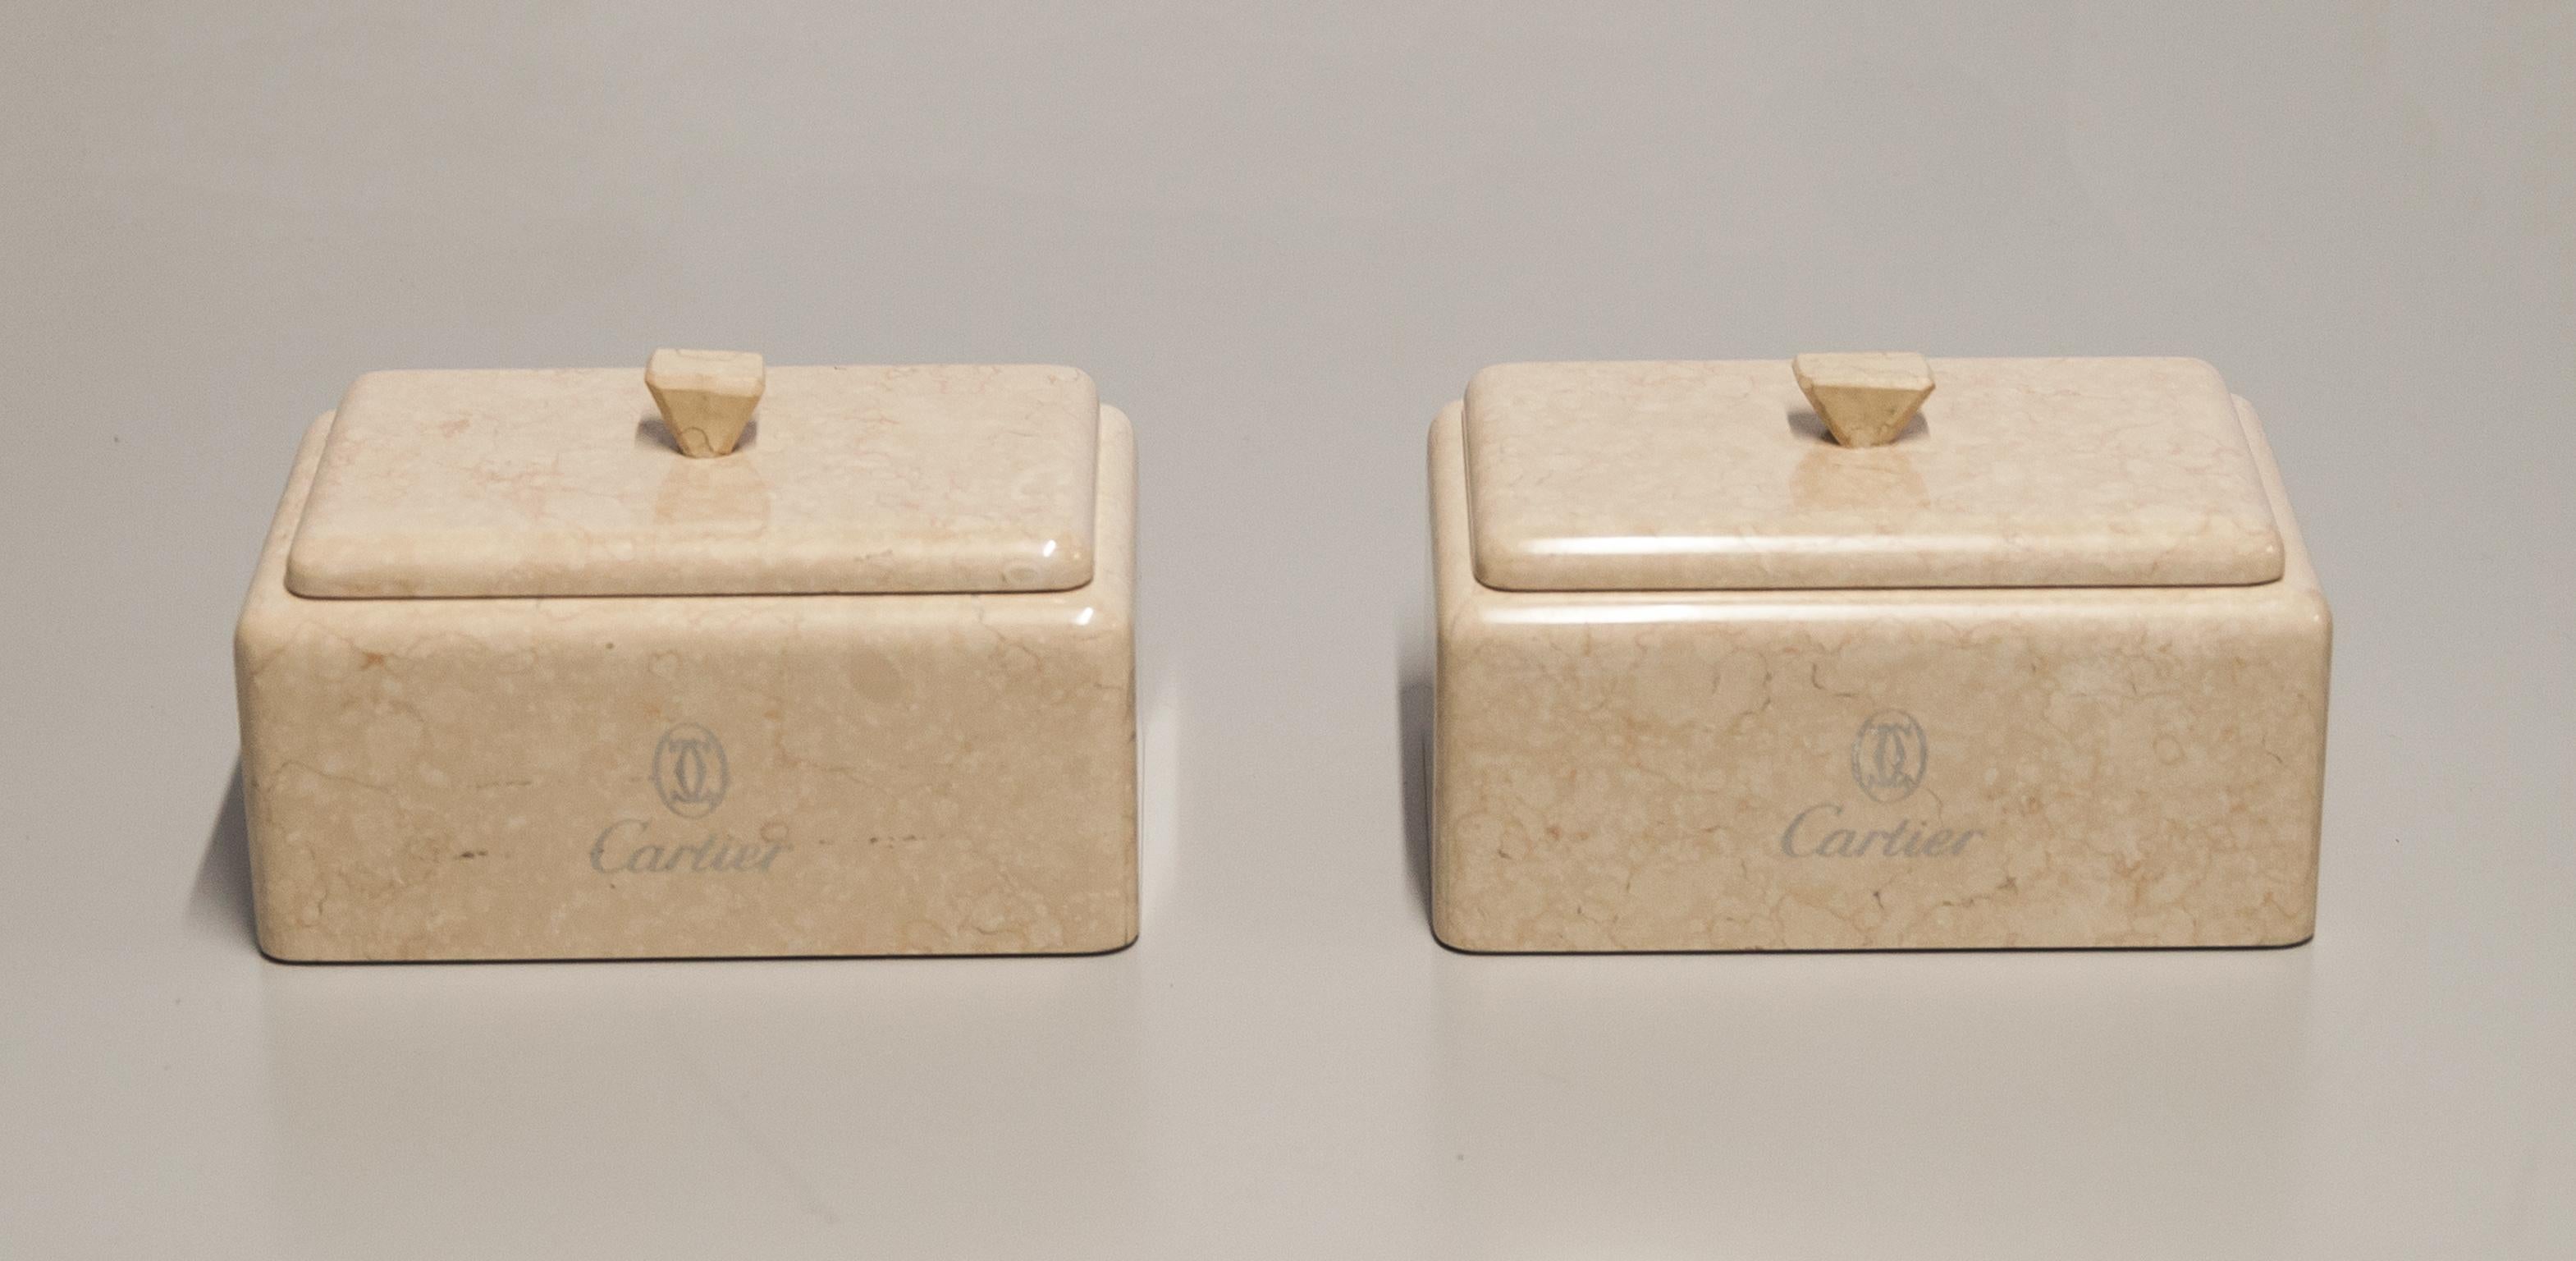 Elegant marble boxes made for Cartier with the silver engraved Logo in excellent condition.
